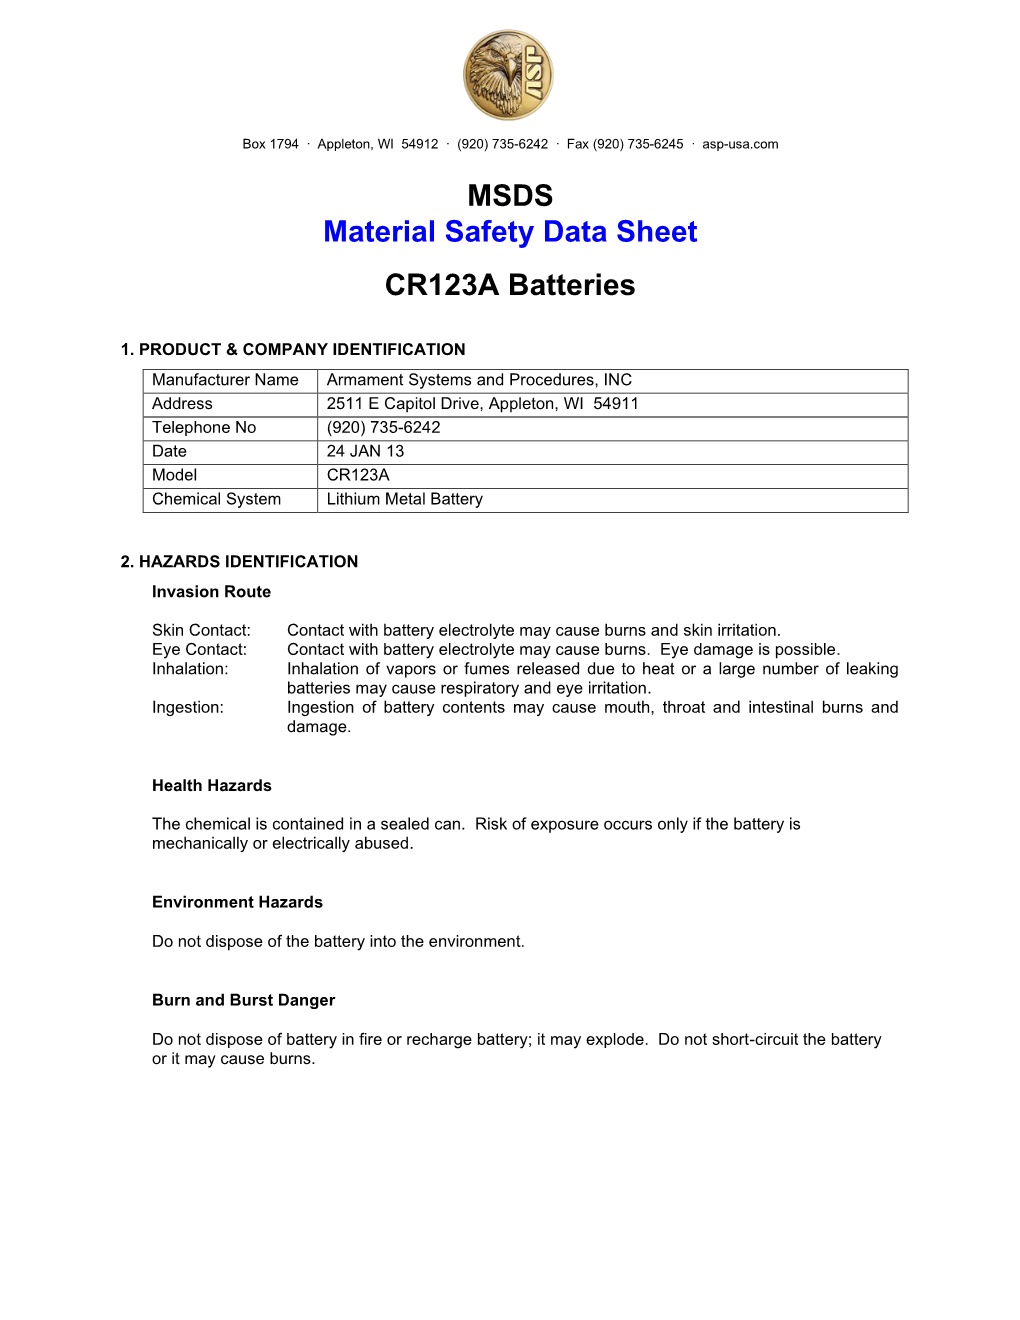 MSDS Material Safety Data Sheet CR123A Batteries